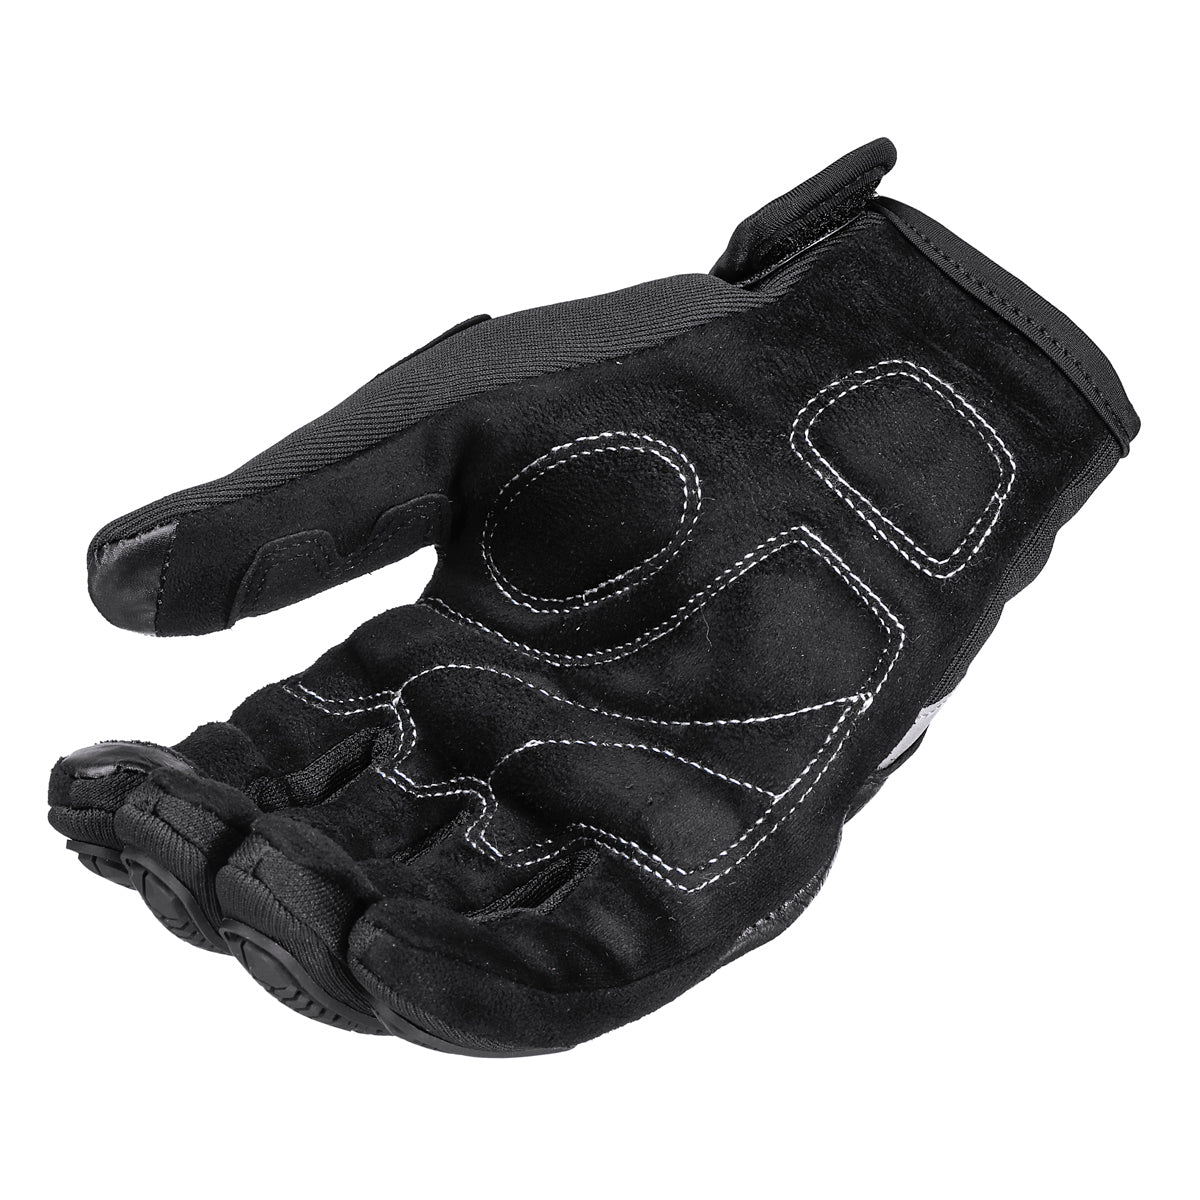 Dark Slate Gray Motorcycle Touch Screen Full Finger Gloves Men For Dirt Bike Racing Outdoor Riding Hard Shell Protection MTO-030